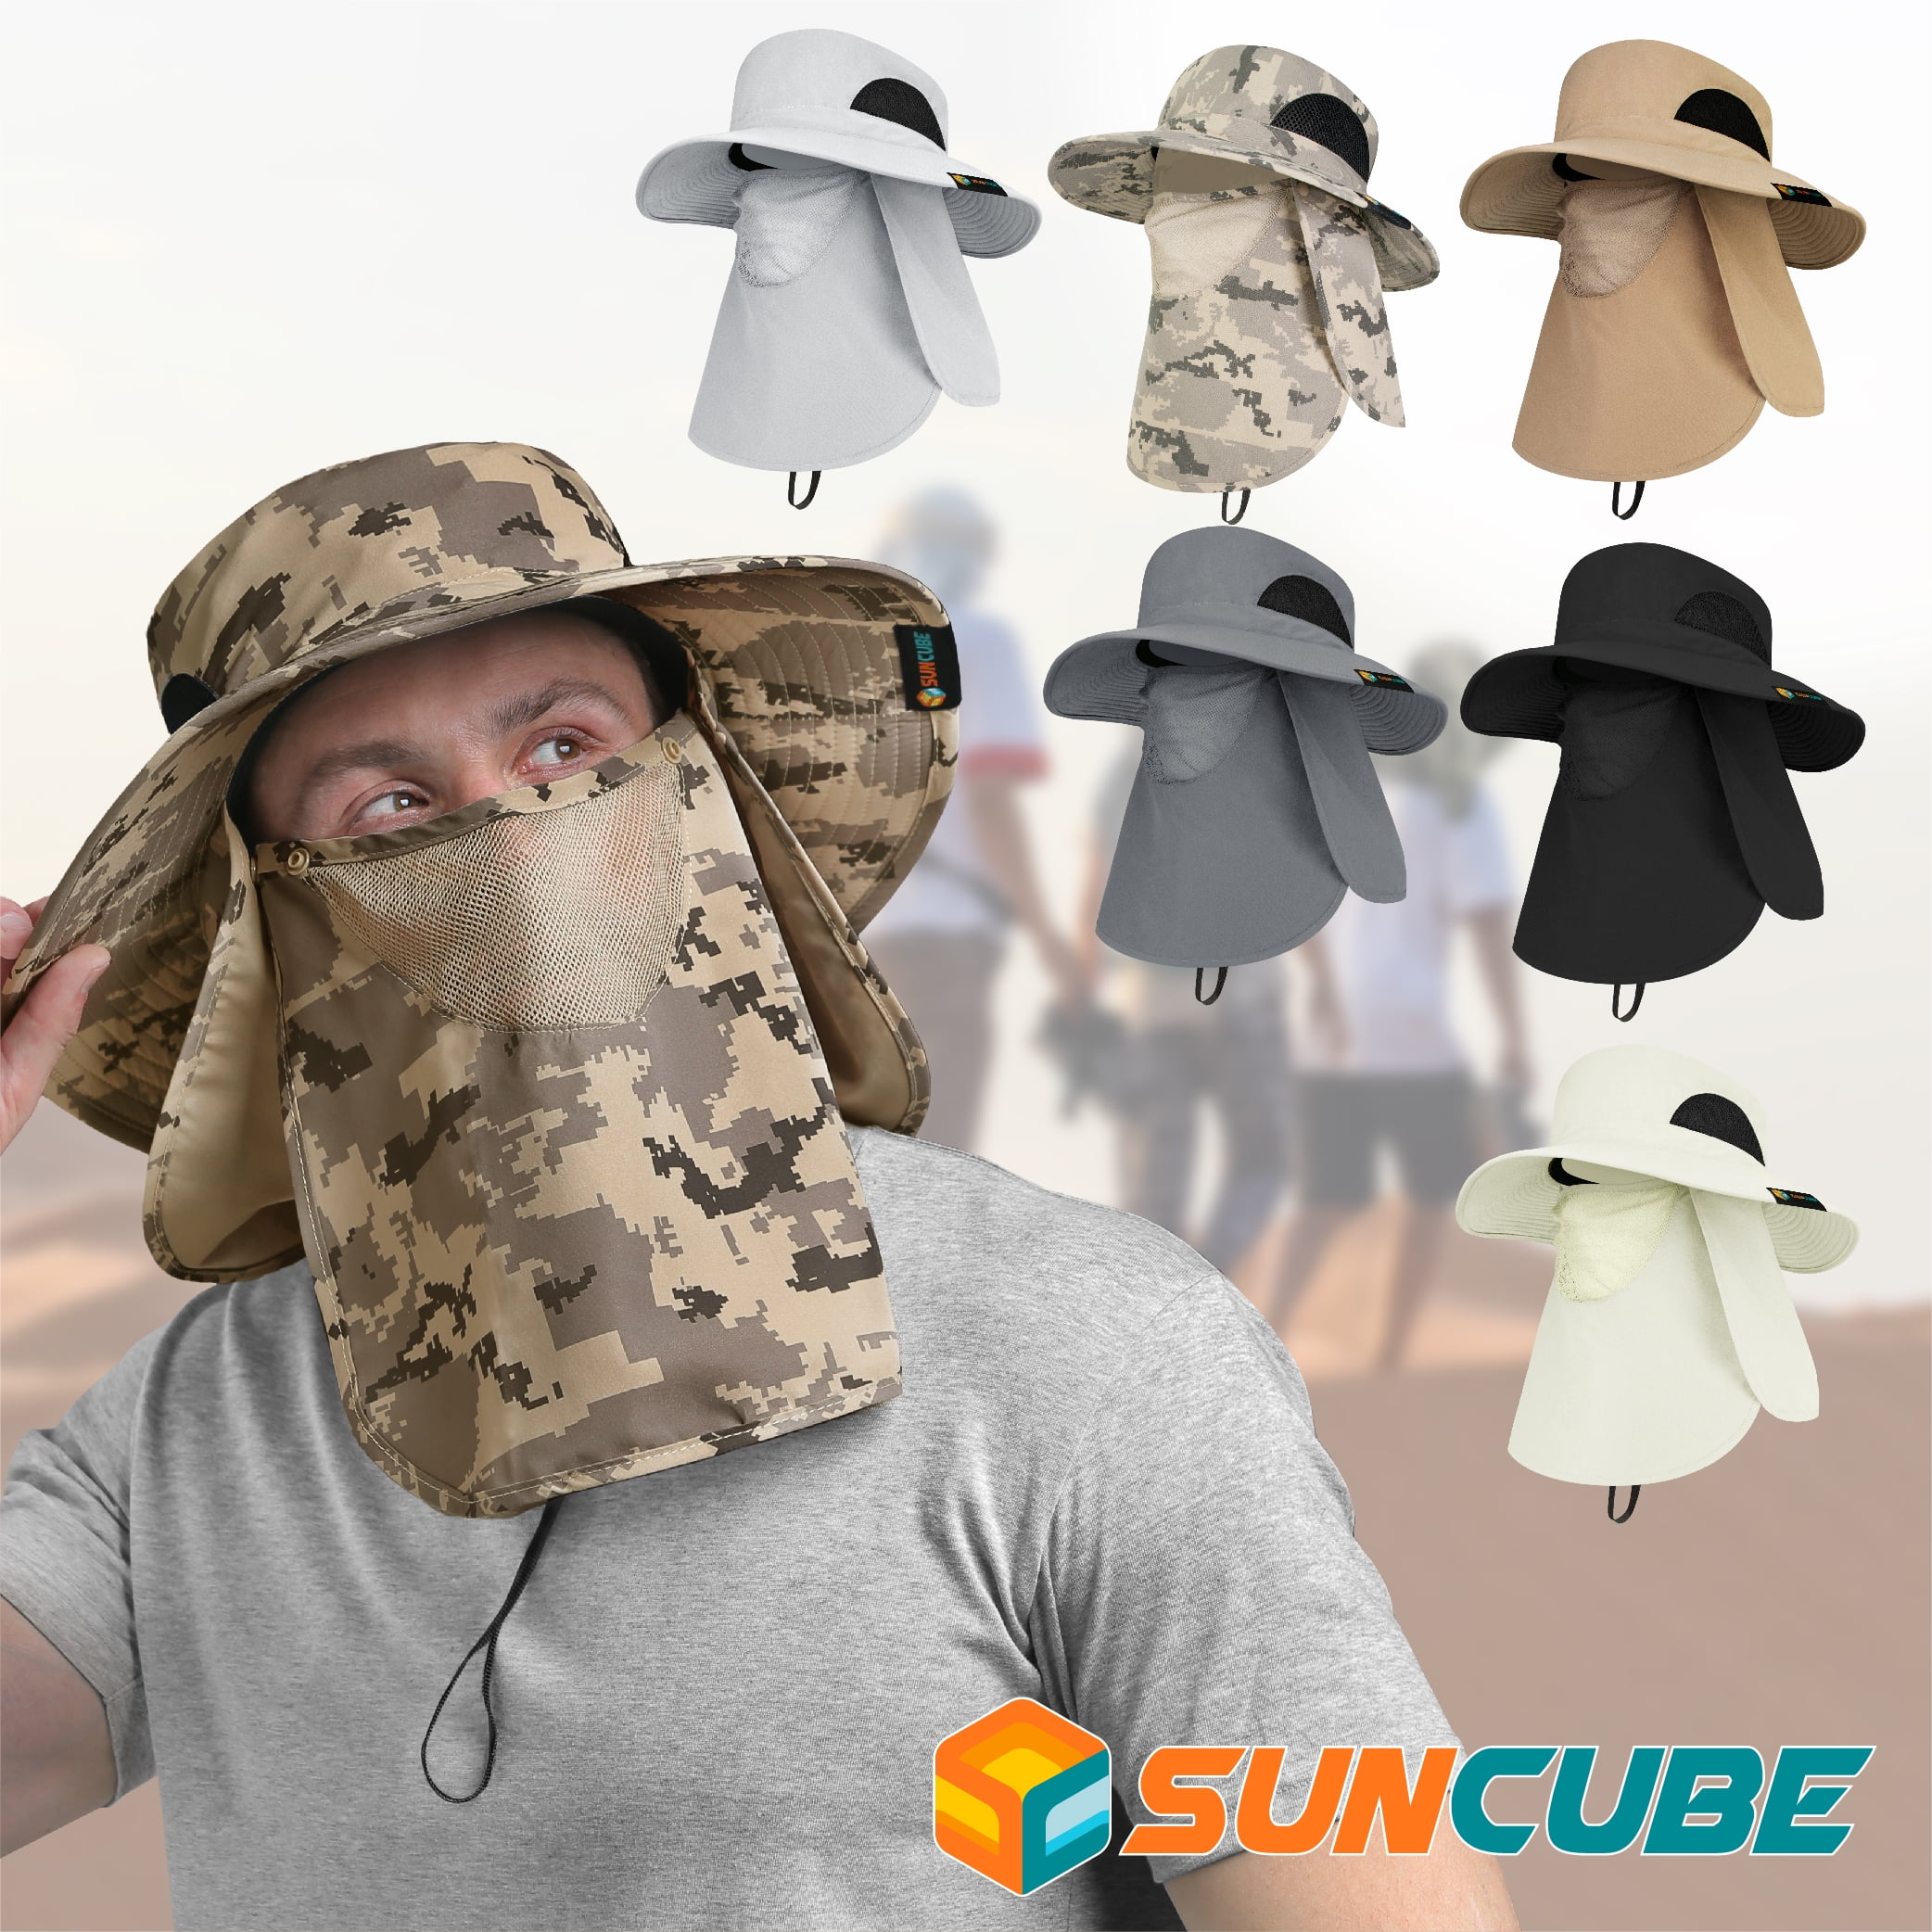 SUN CUBE Fishing Hat for Men Outdoor UV Sun Protection Wide Brim Sun Hat  with Neck Flap Face Cover - Outdoor Hiking Safari UPF50+ Boonie Bucket Hat ( Black) 